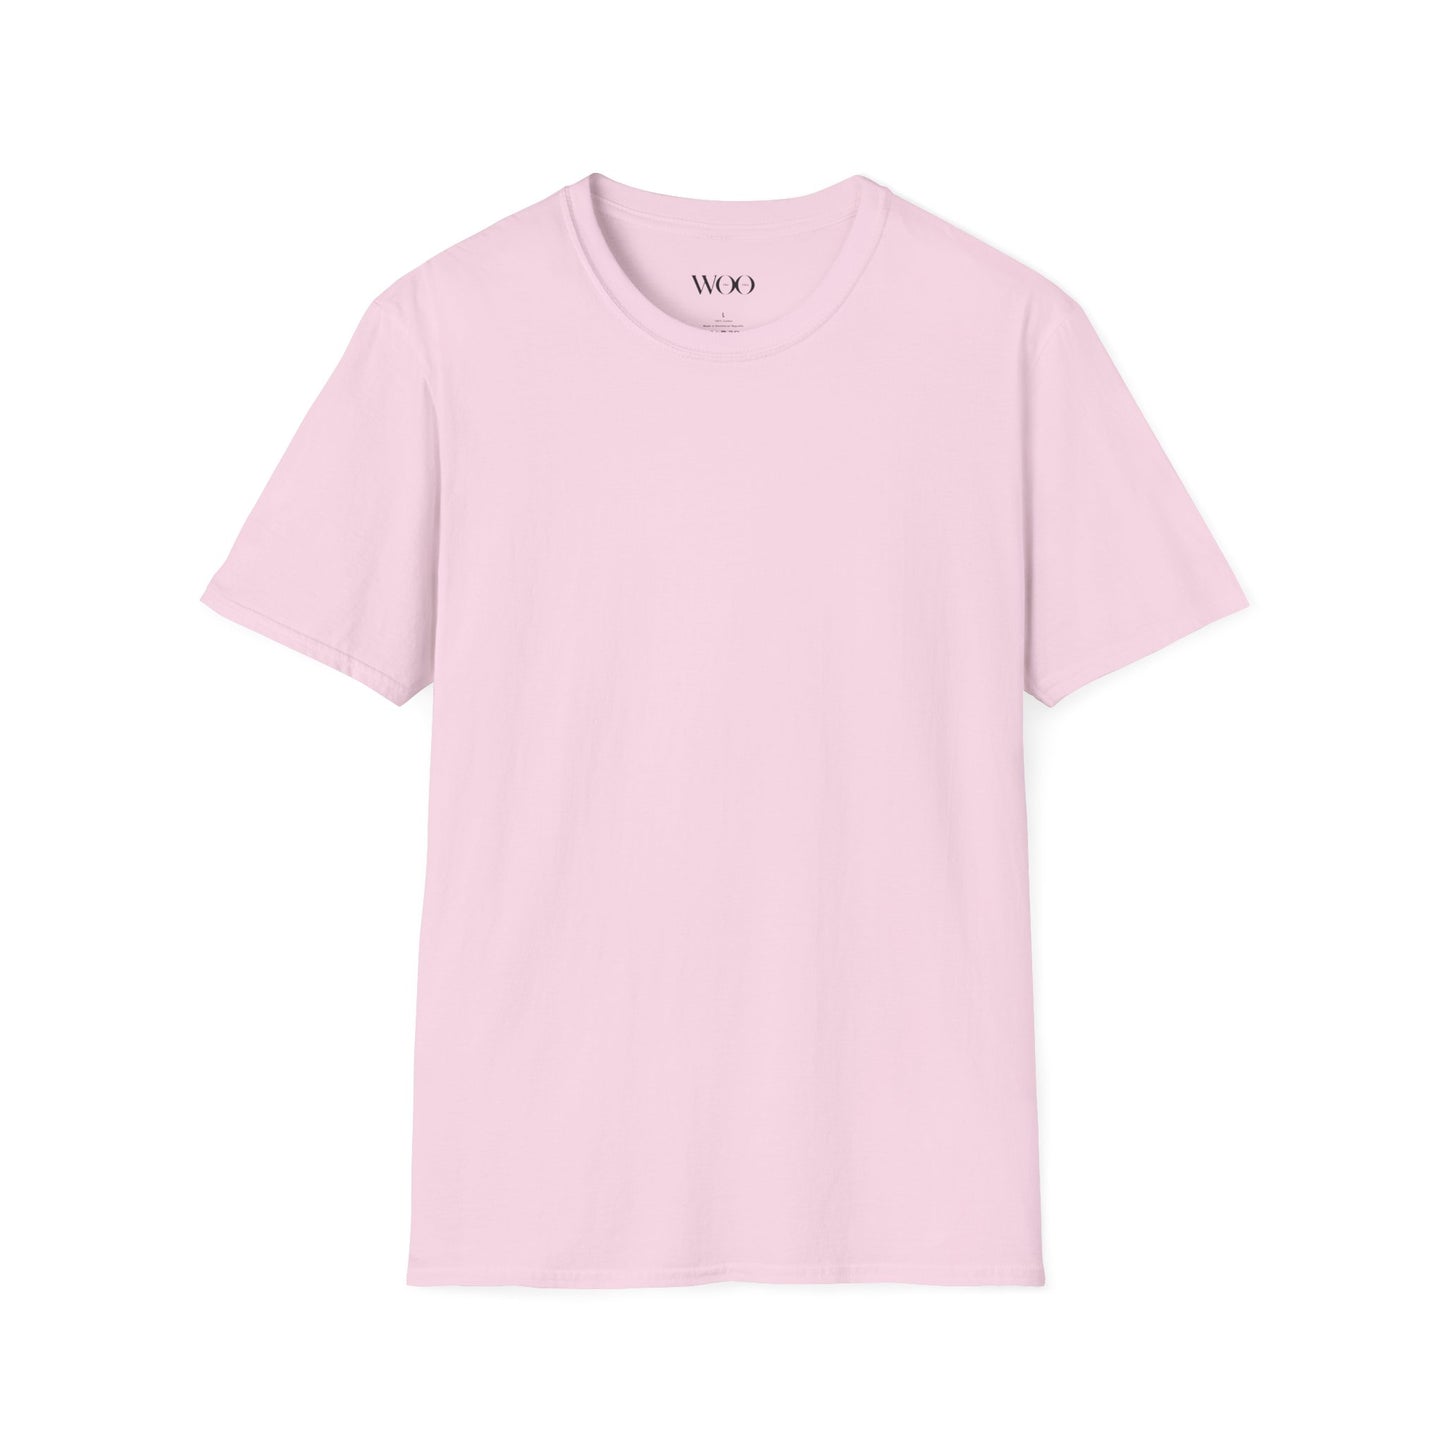 Petty in Pink - tee x Sarah Words Collection